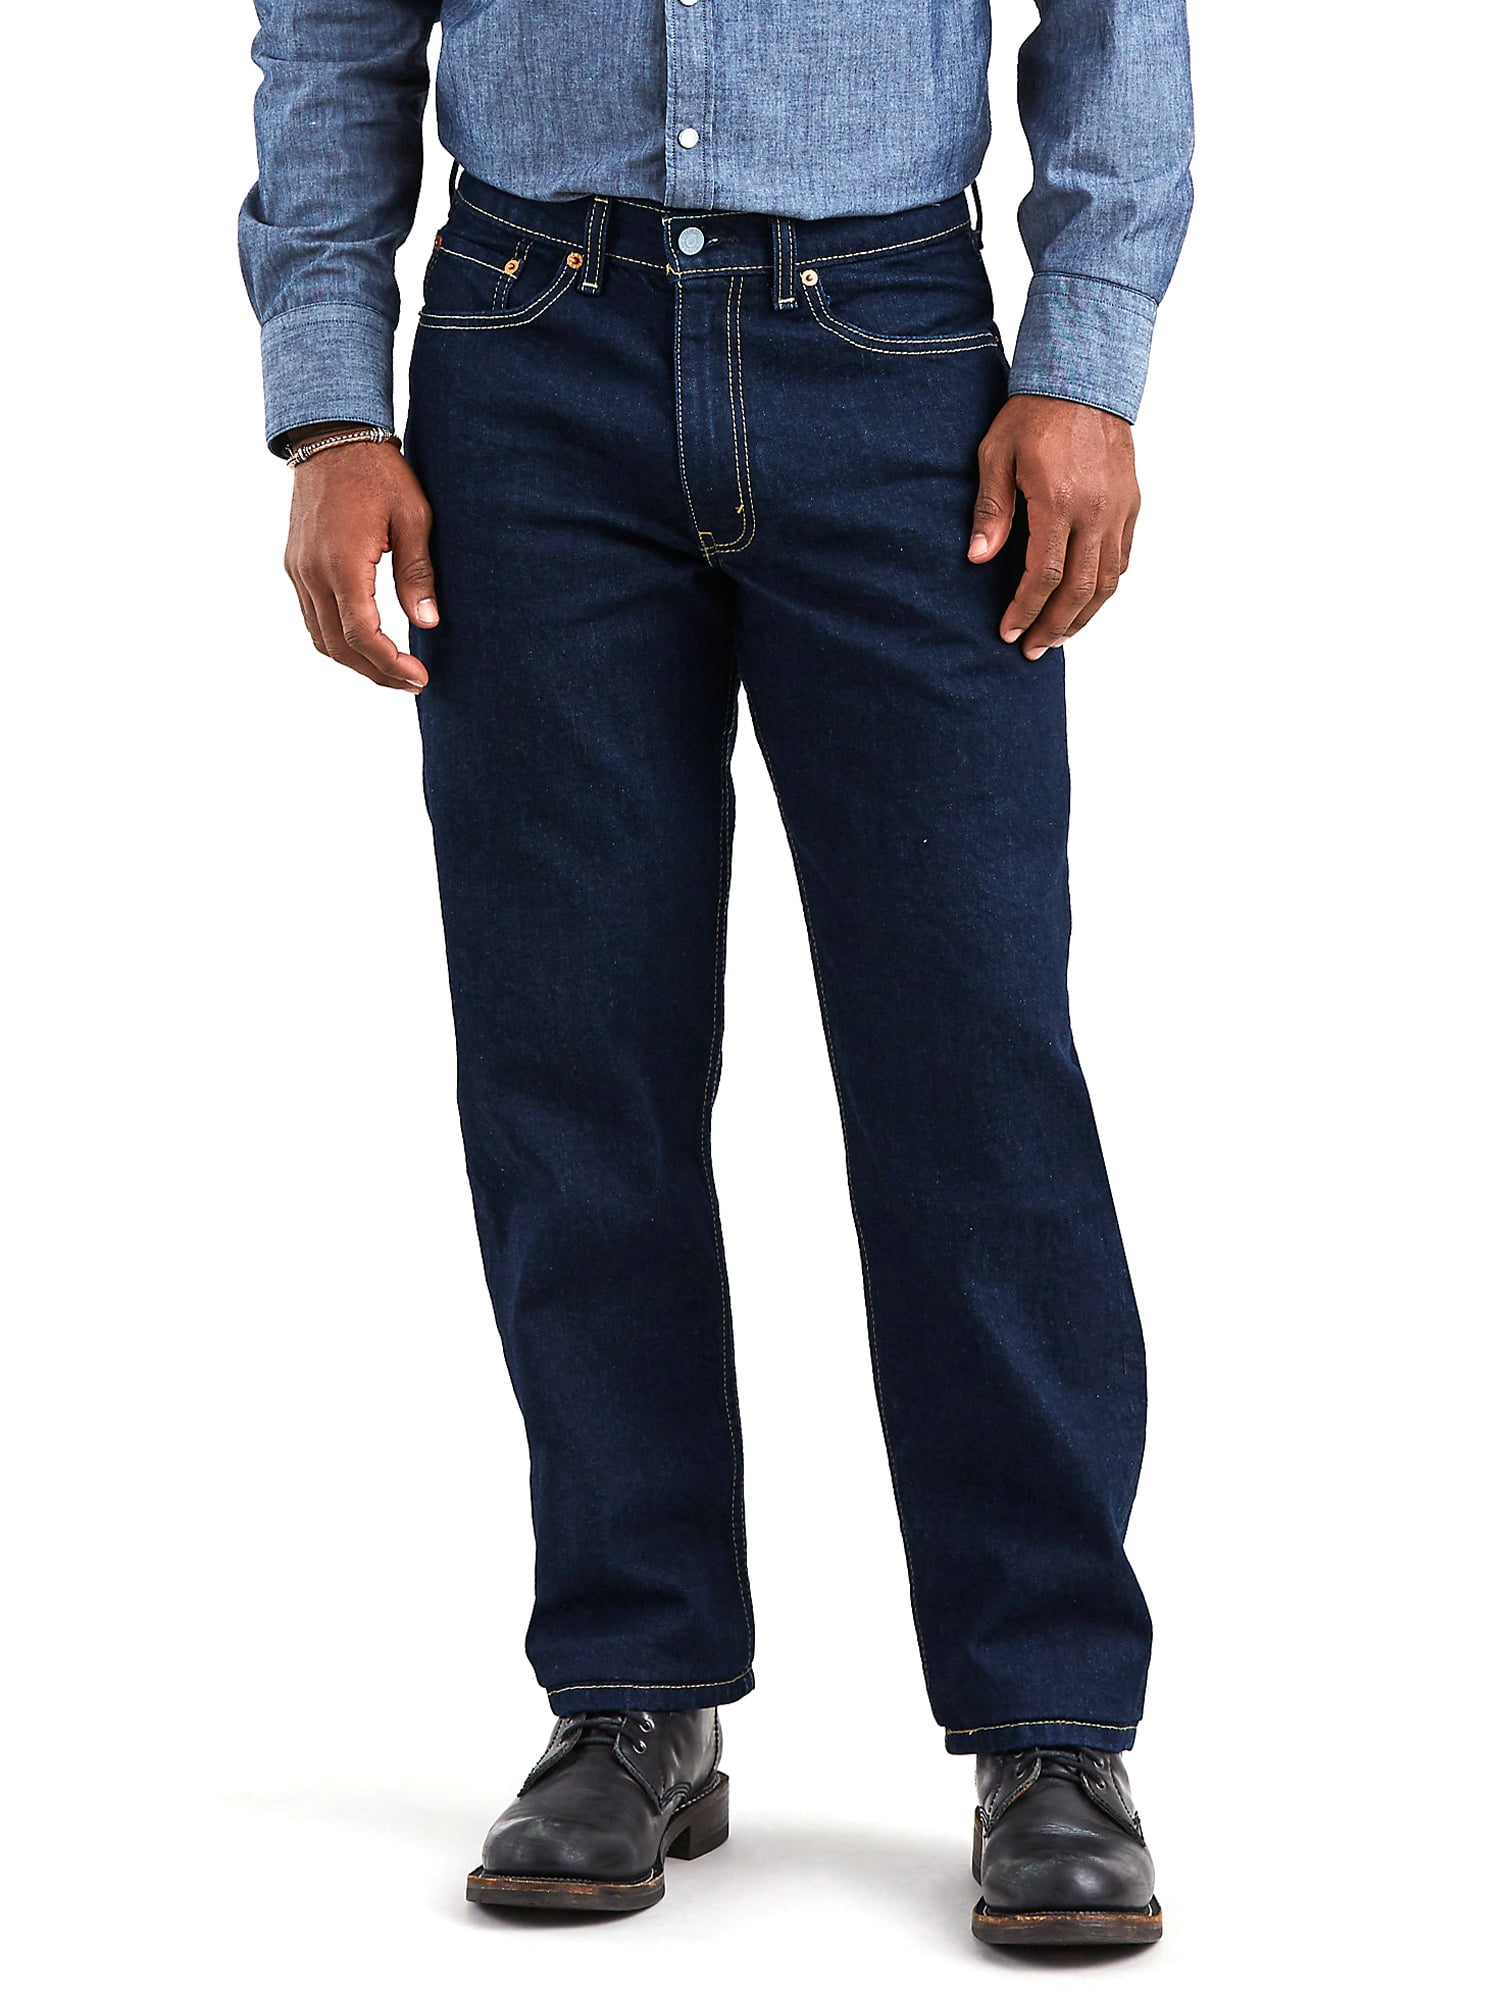 levi 557 jeans discontinued